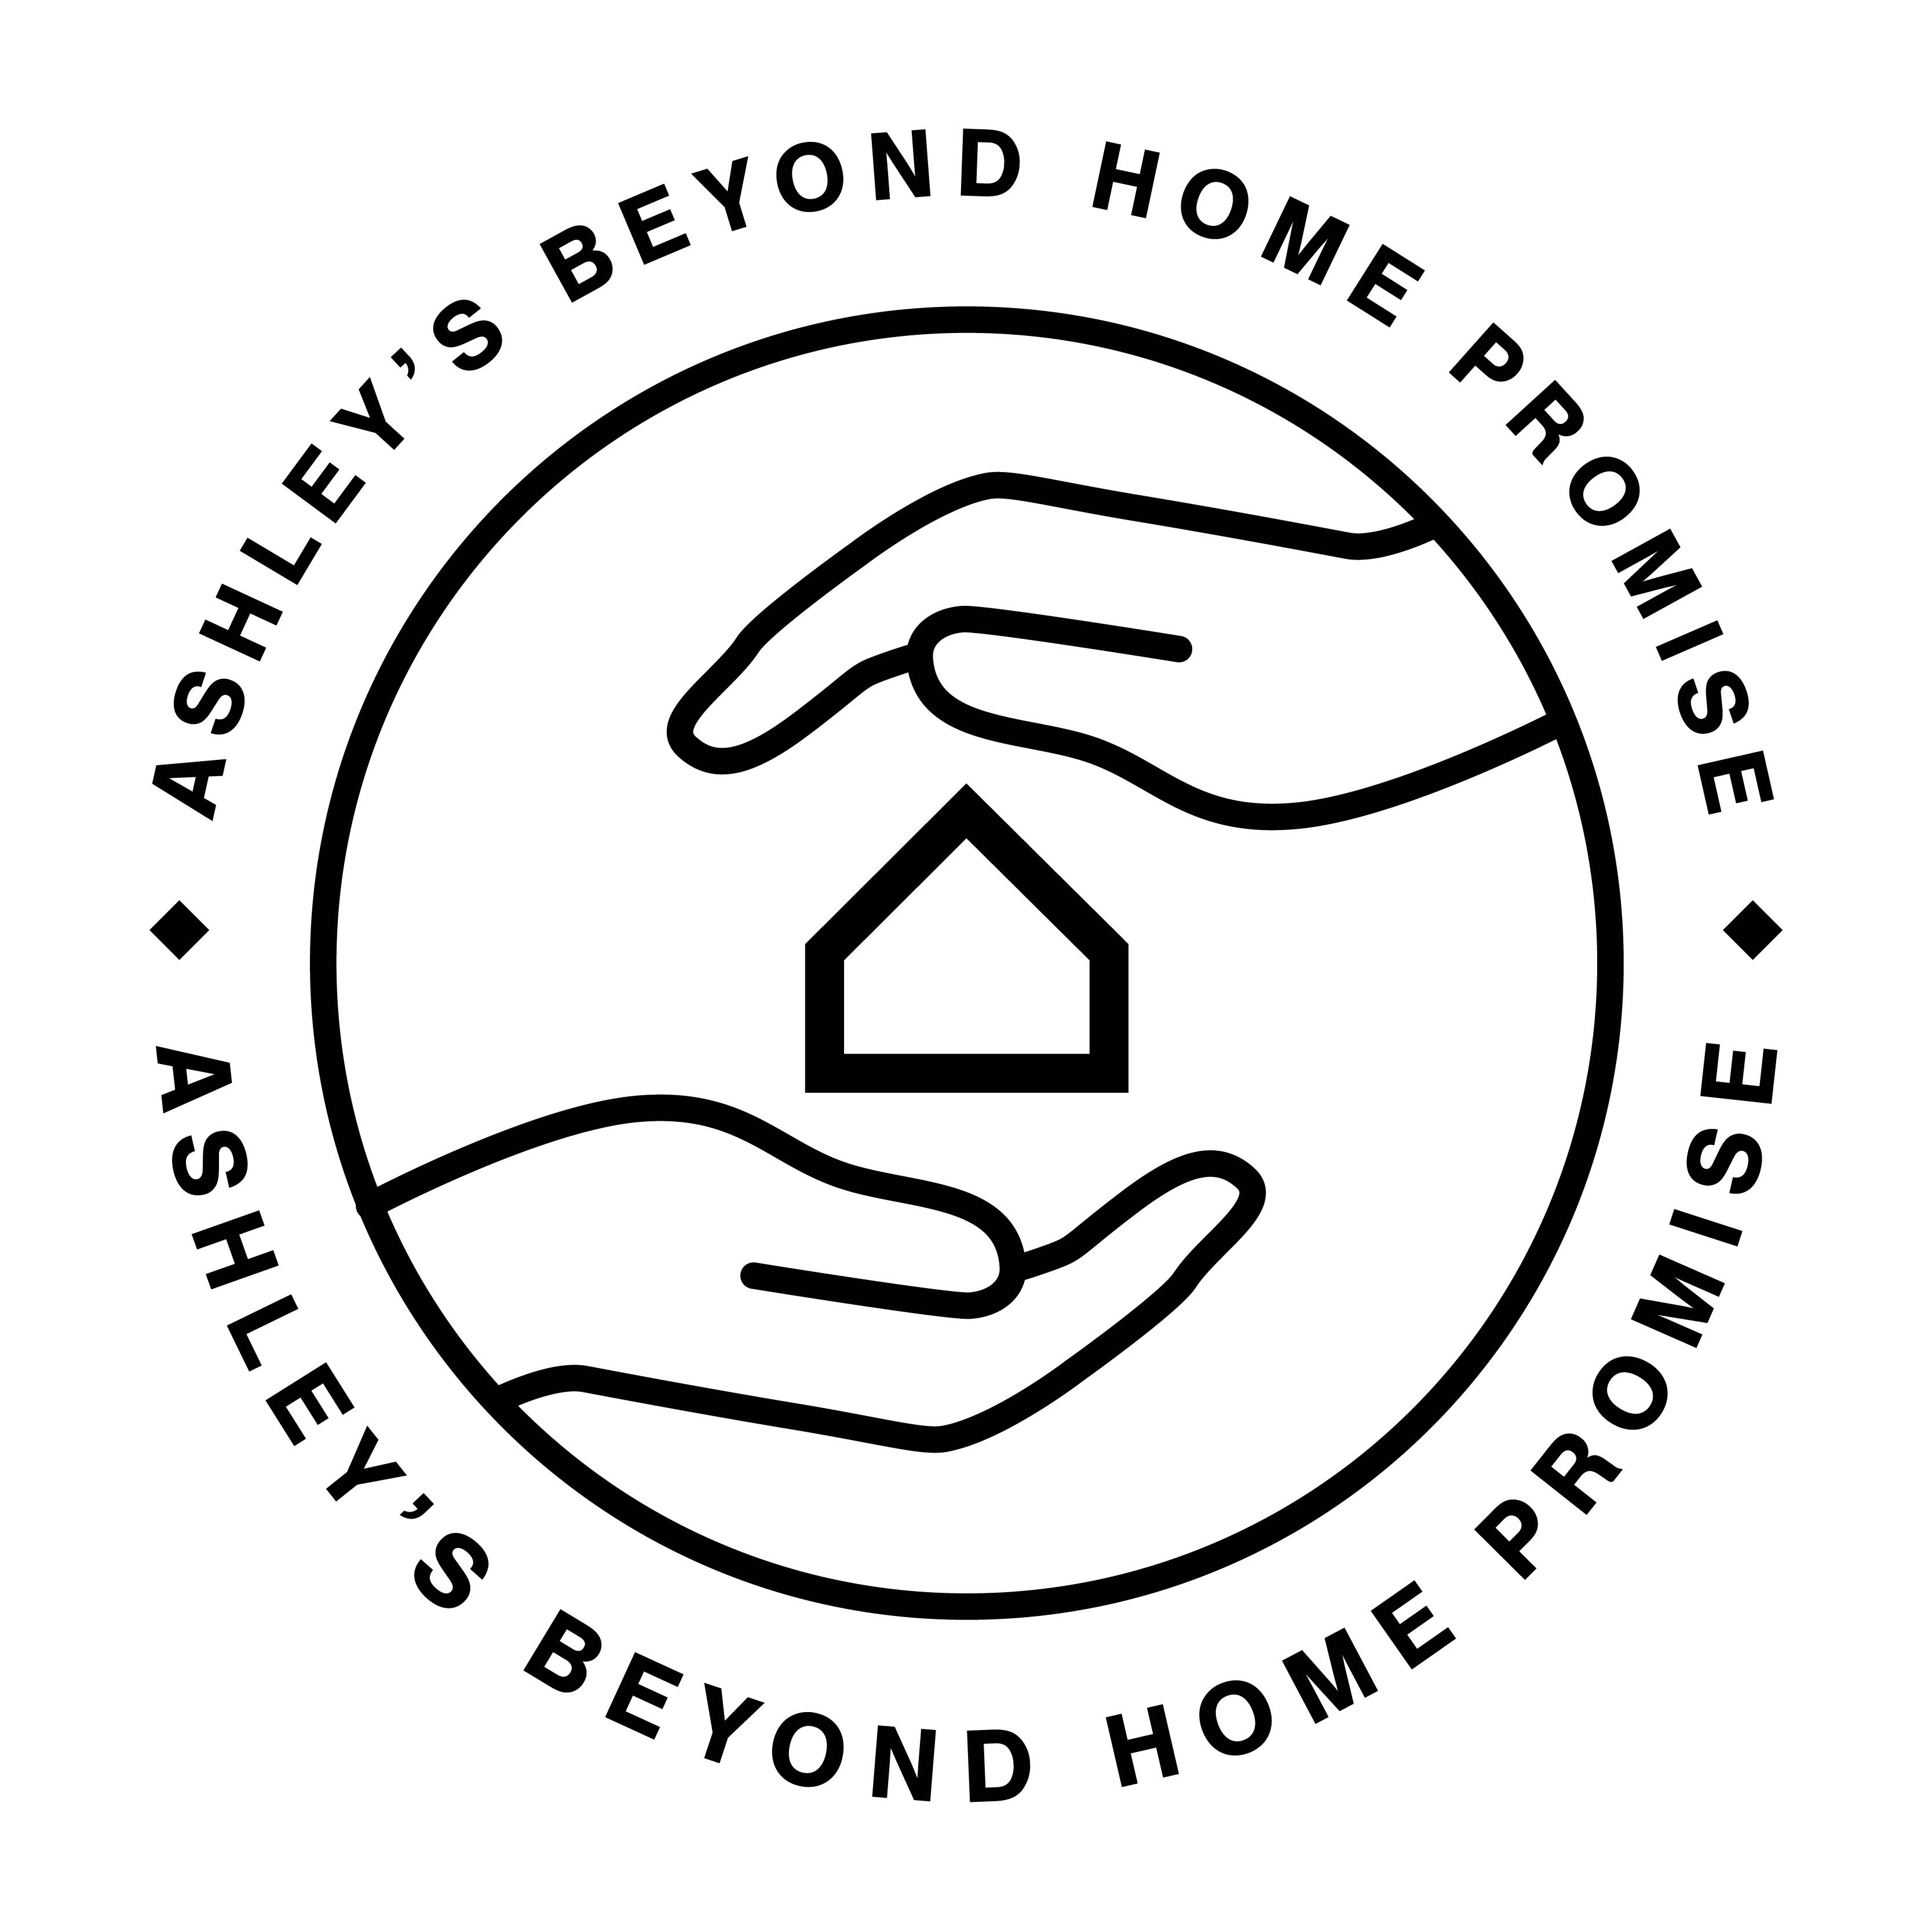  ASHLEY'S BEYOND HOME PROMISE